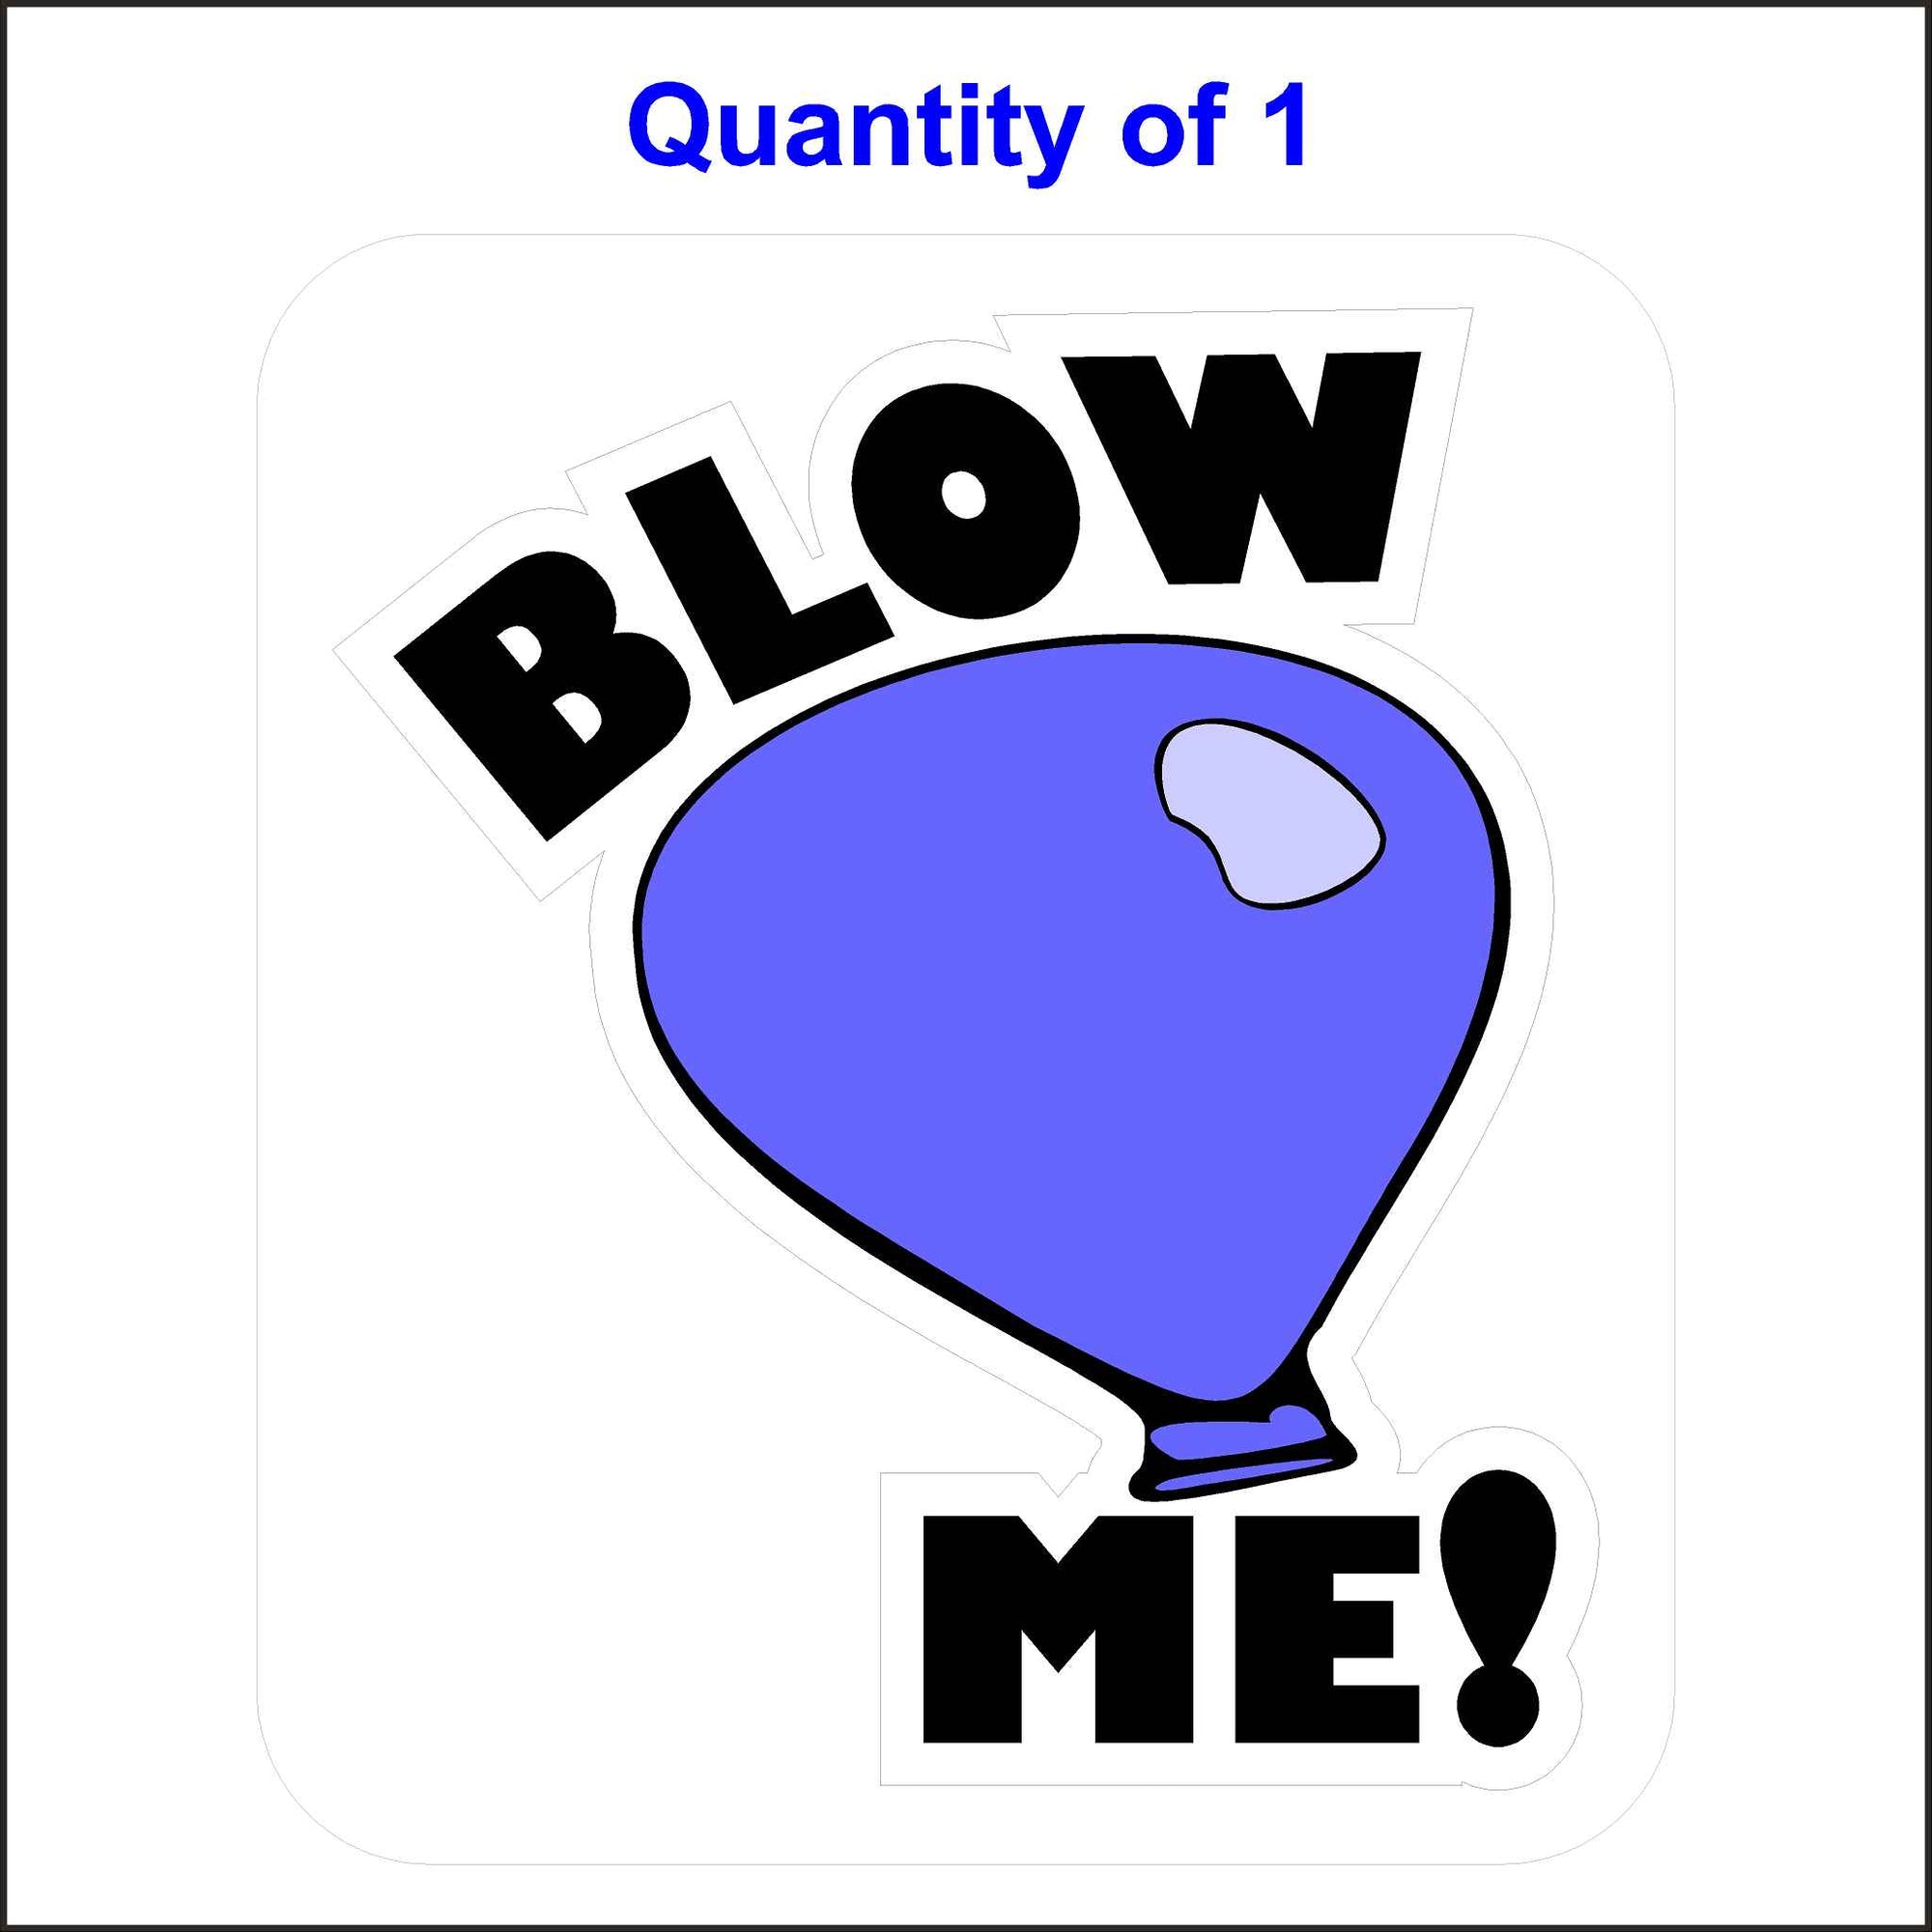 Blow Me Hard Hat Sticker. Printed in Black Are the Words Blow Me! They  Wrap Around a Purple Balloon.